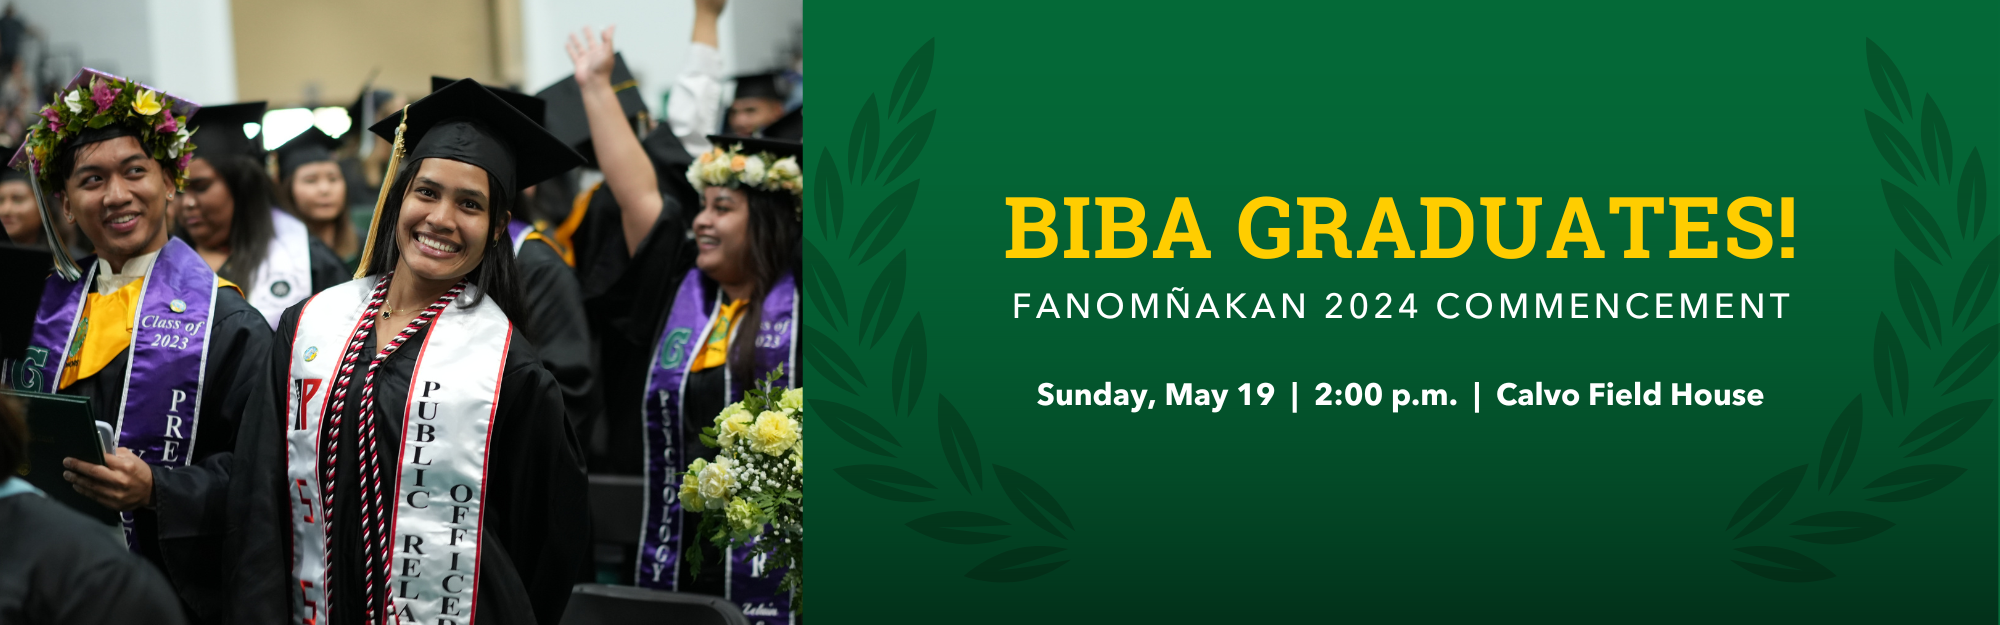 The University of Guam will hold its Fañomnåkan (Spring) Commencement Ceremony at 2 p.m. on Sunday, May 19, 2024, at the Calvo Field House.